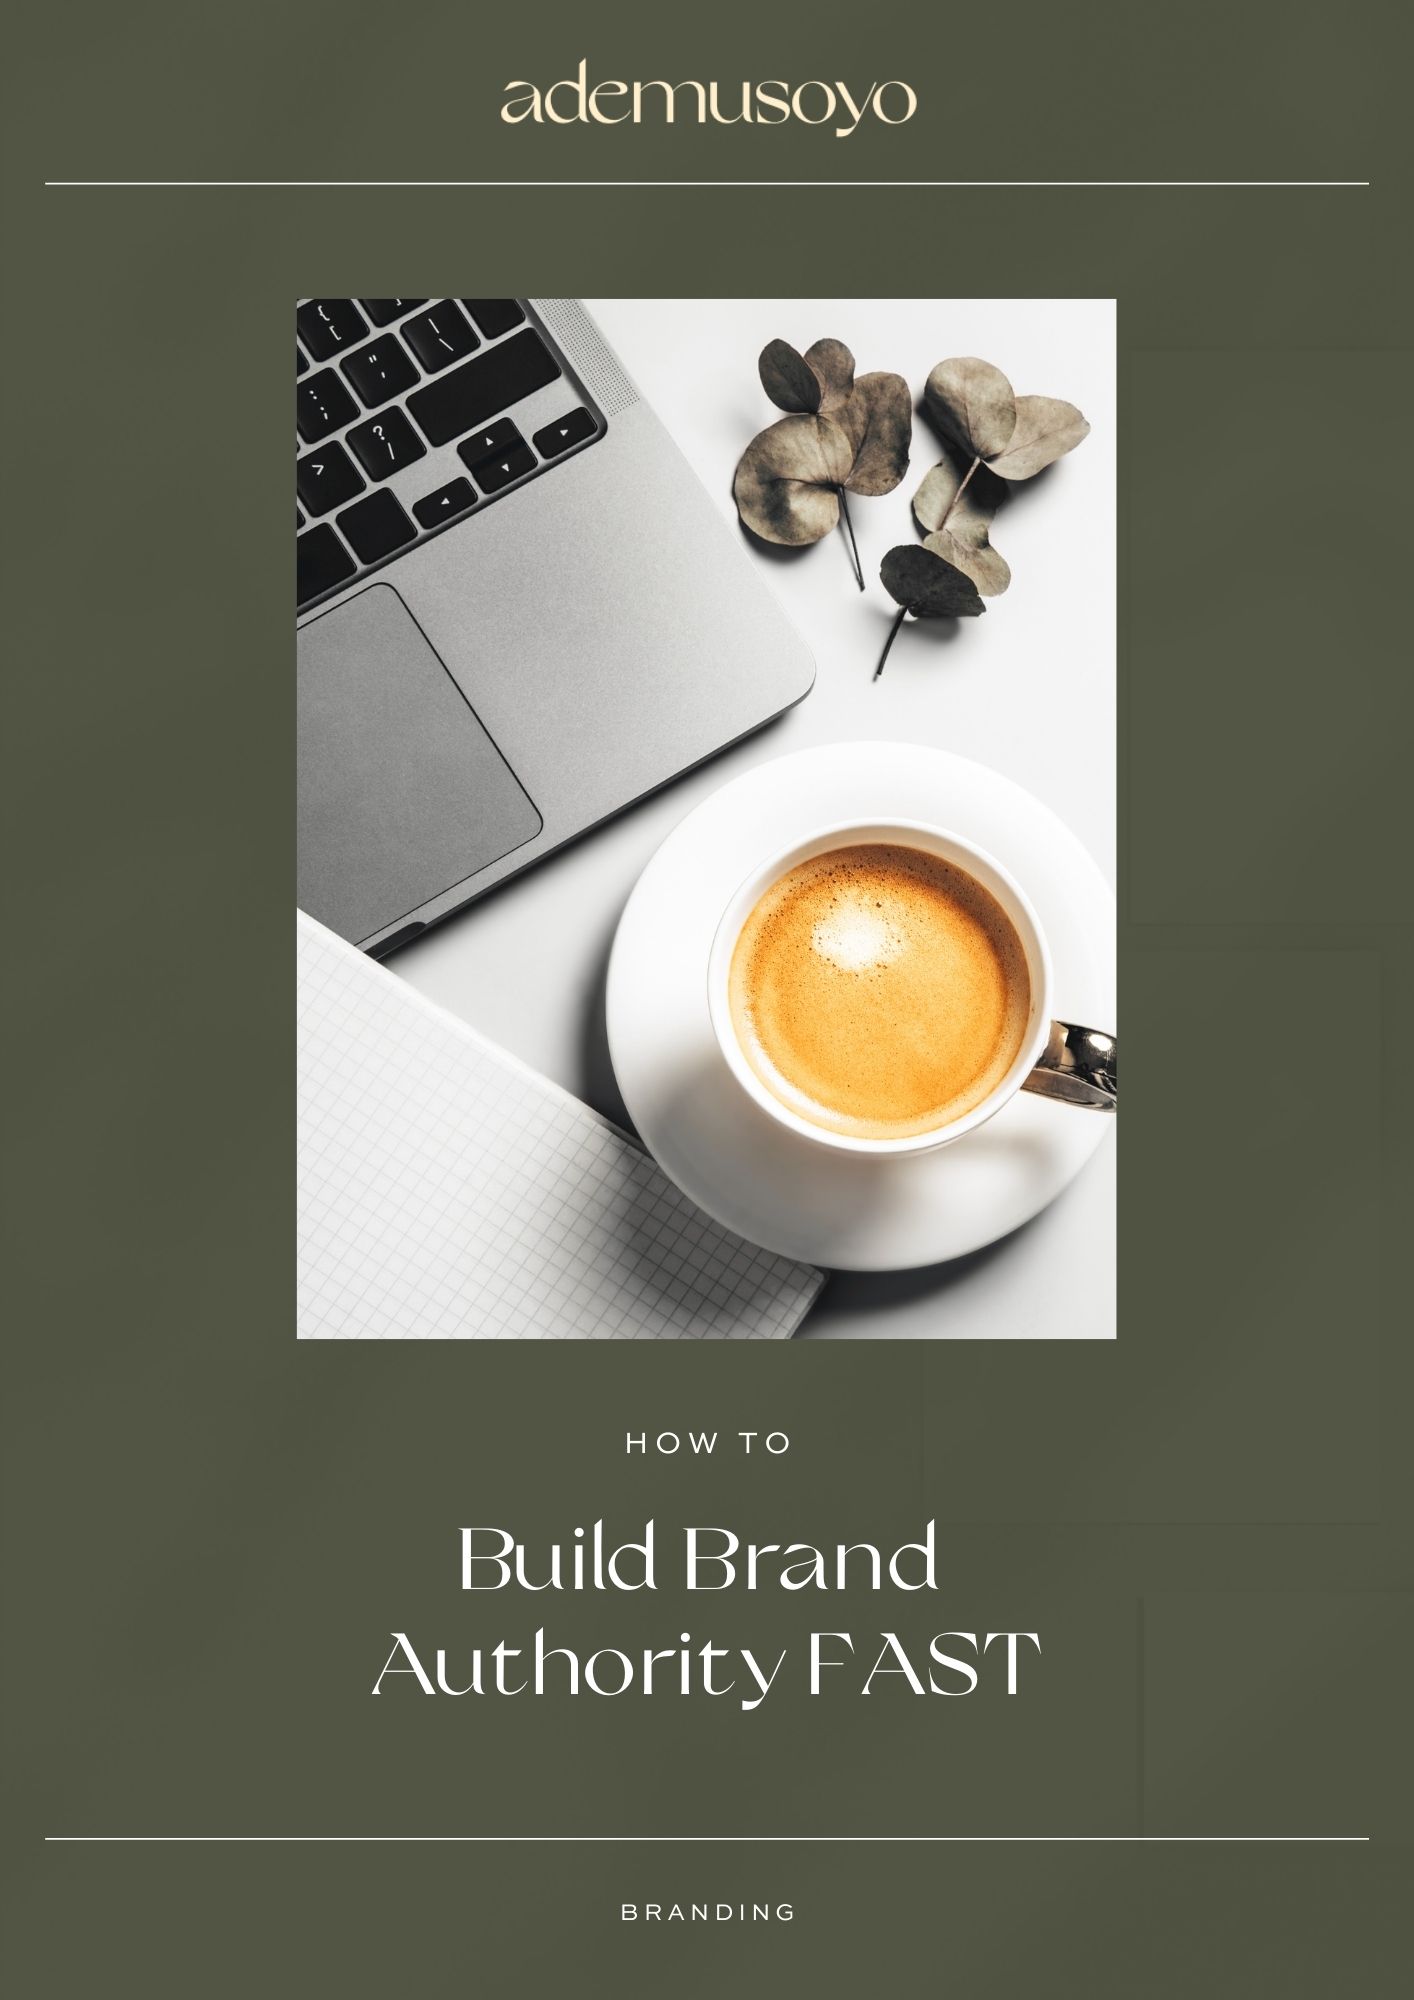 How To Build Brand Authority FAST